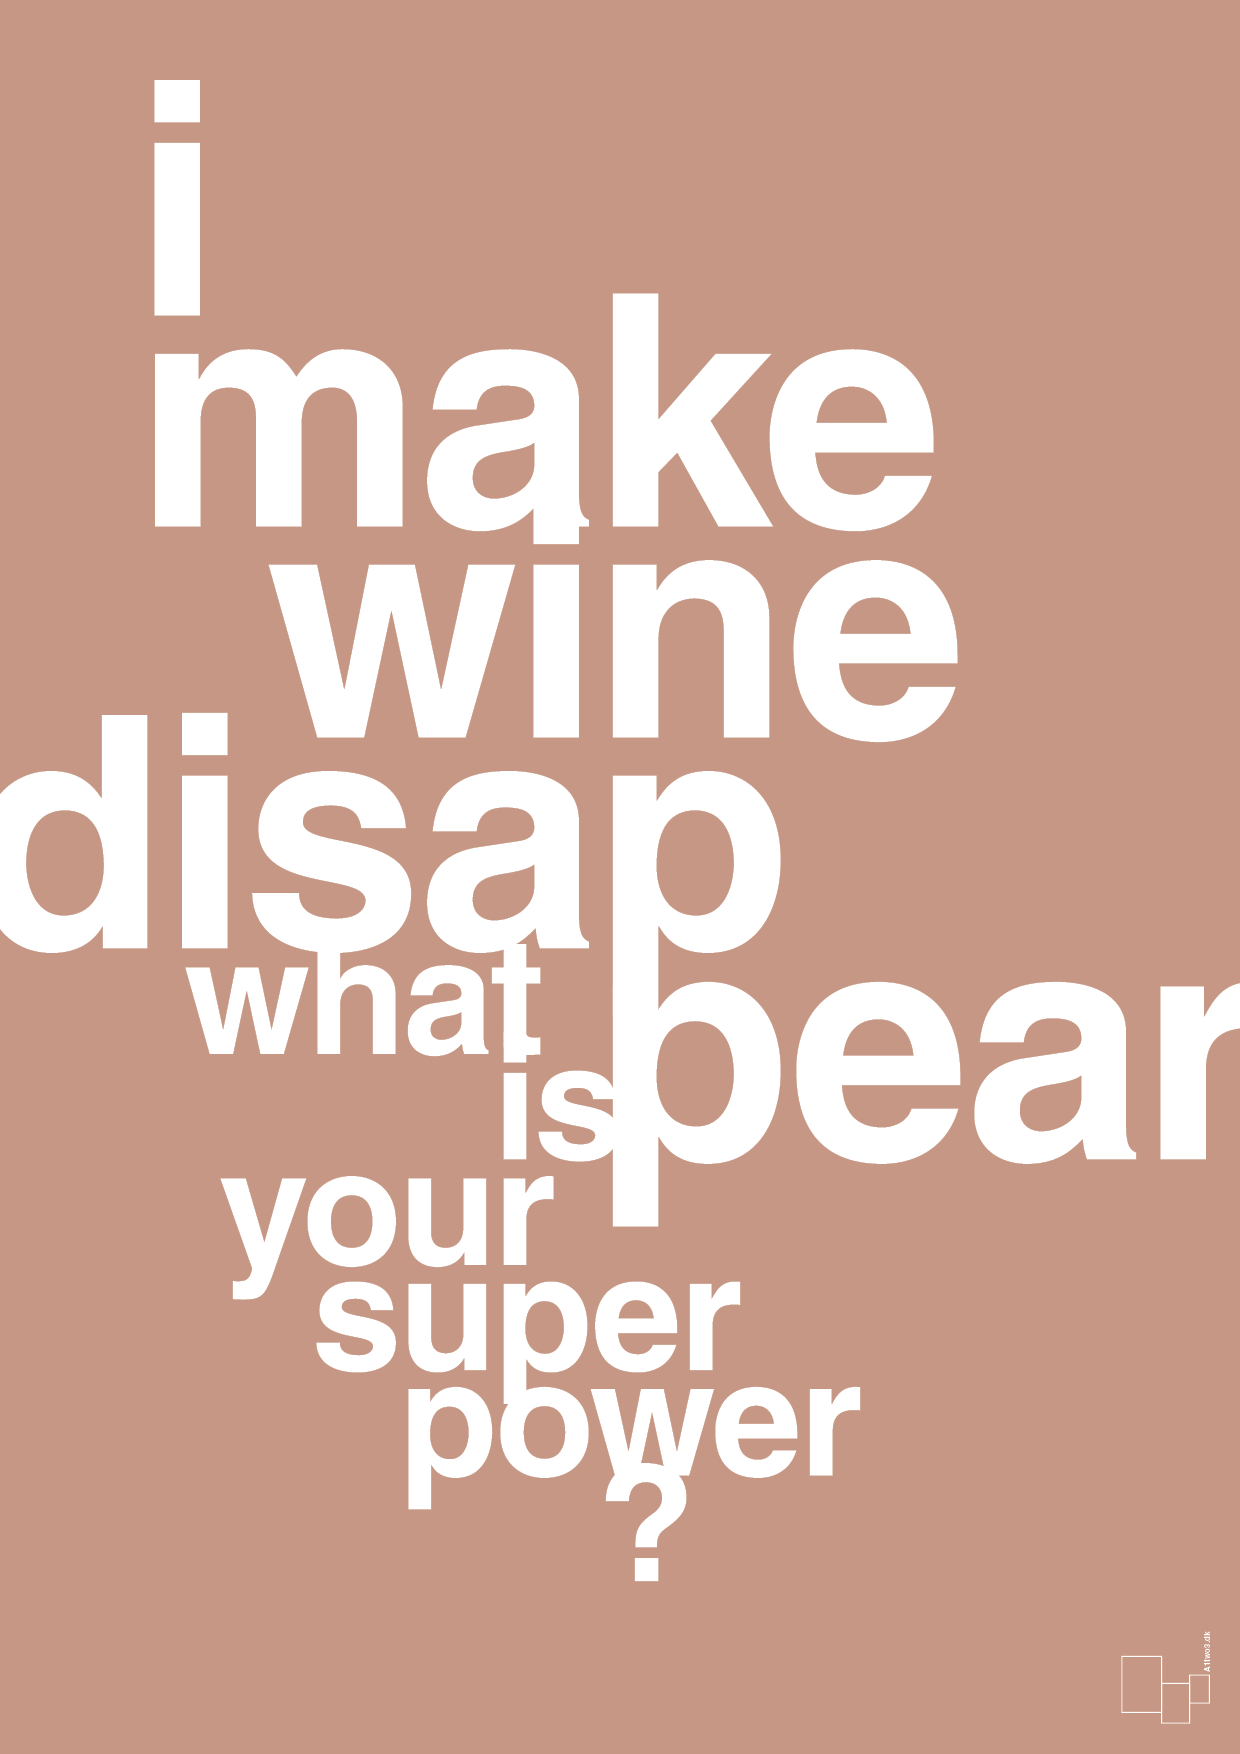 i make wine disappear what is your super power - Plakat med Mad & Drikke i Powder